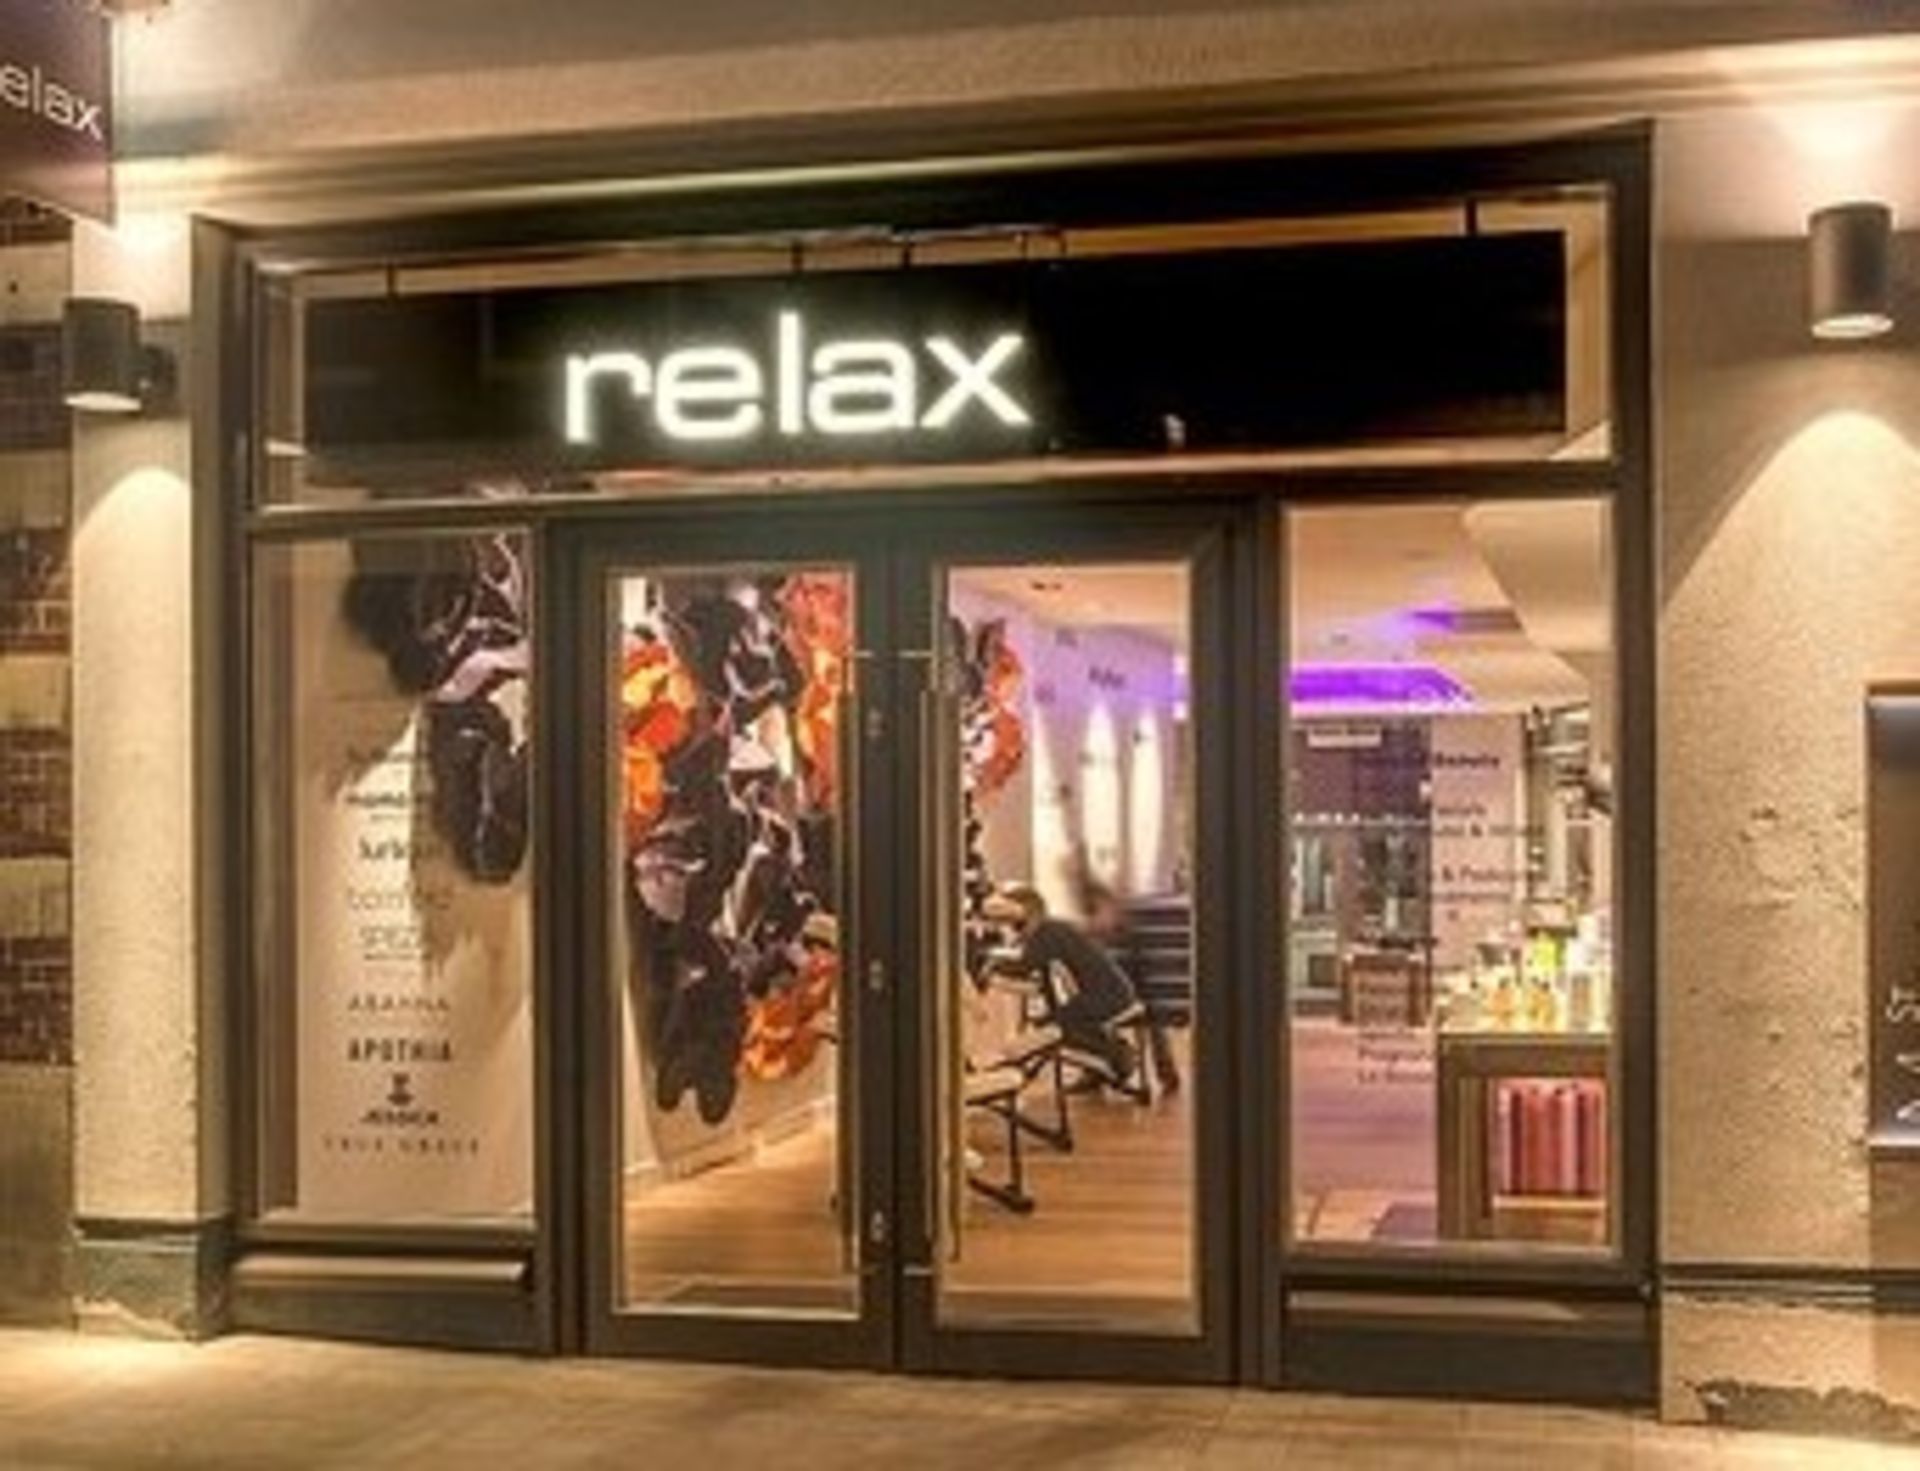 1 x Cool White RELAX Advertisement Illuminated Signage - Individual Perspex Letters Mounted on Rails - Bild 4 aus 5